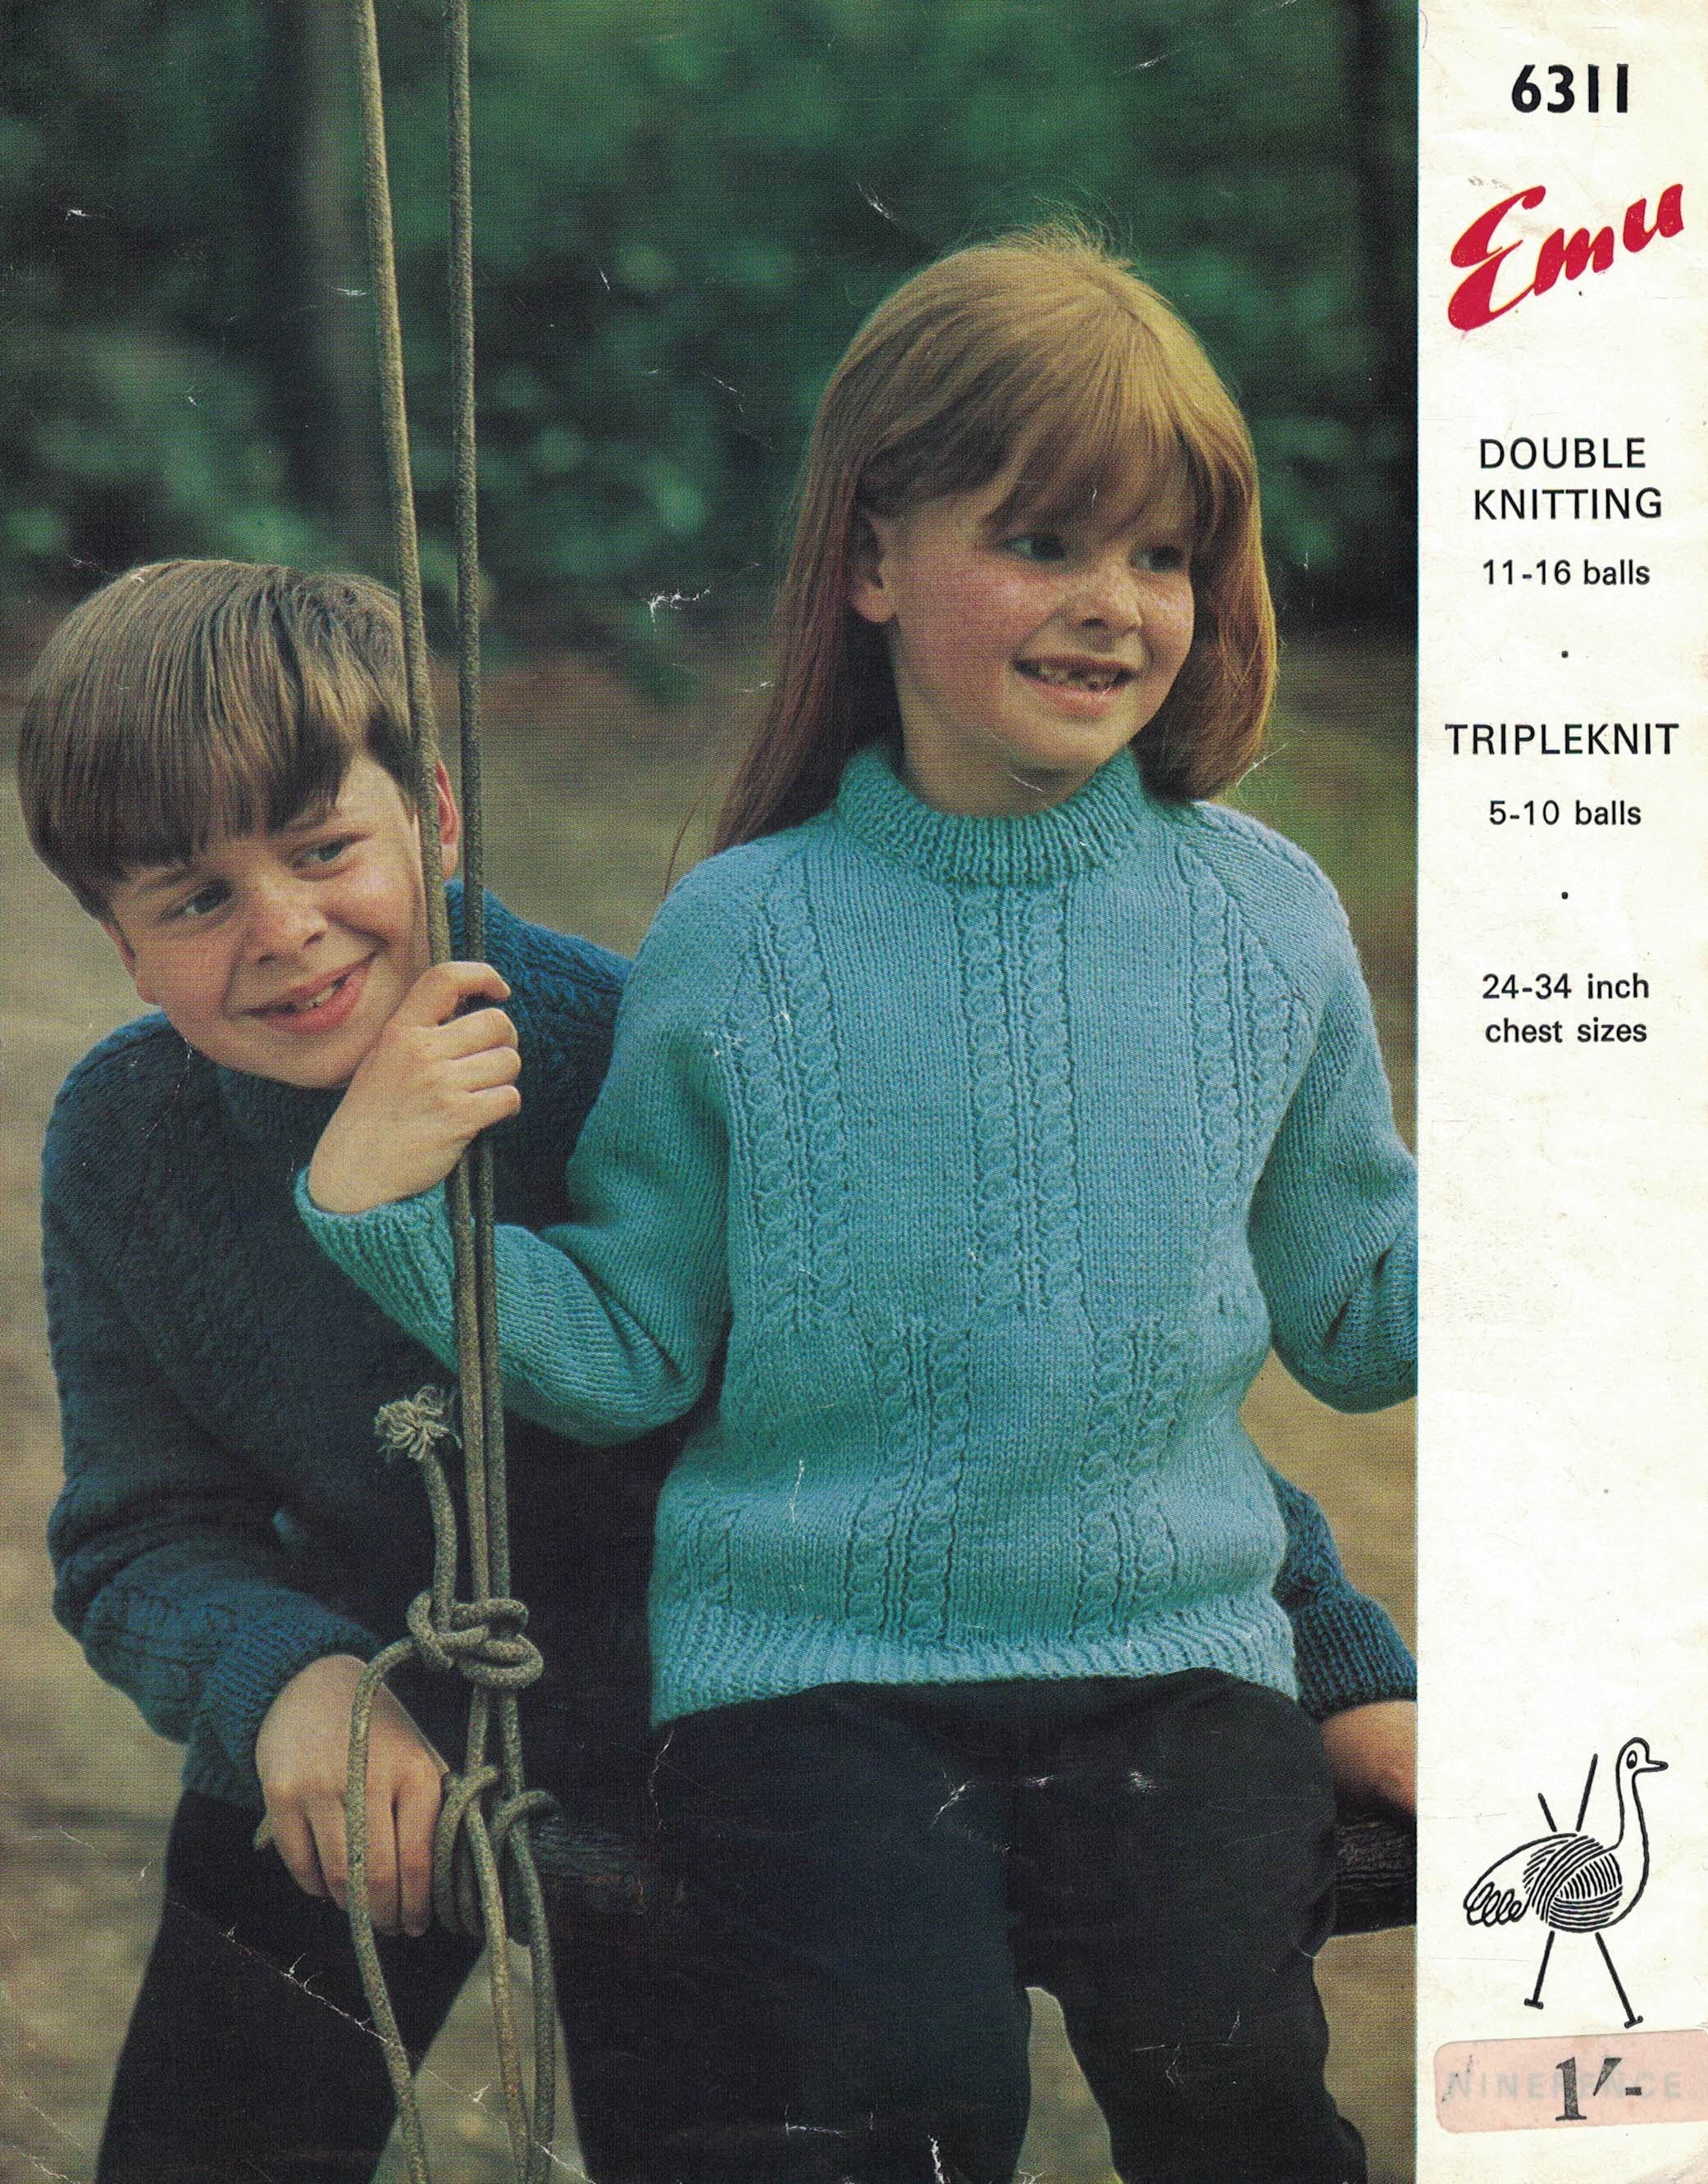 Vintage EMU Knitting Pattern for Childrens Crew Neck Sweaters | Etsy